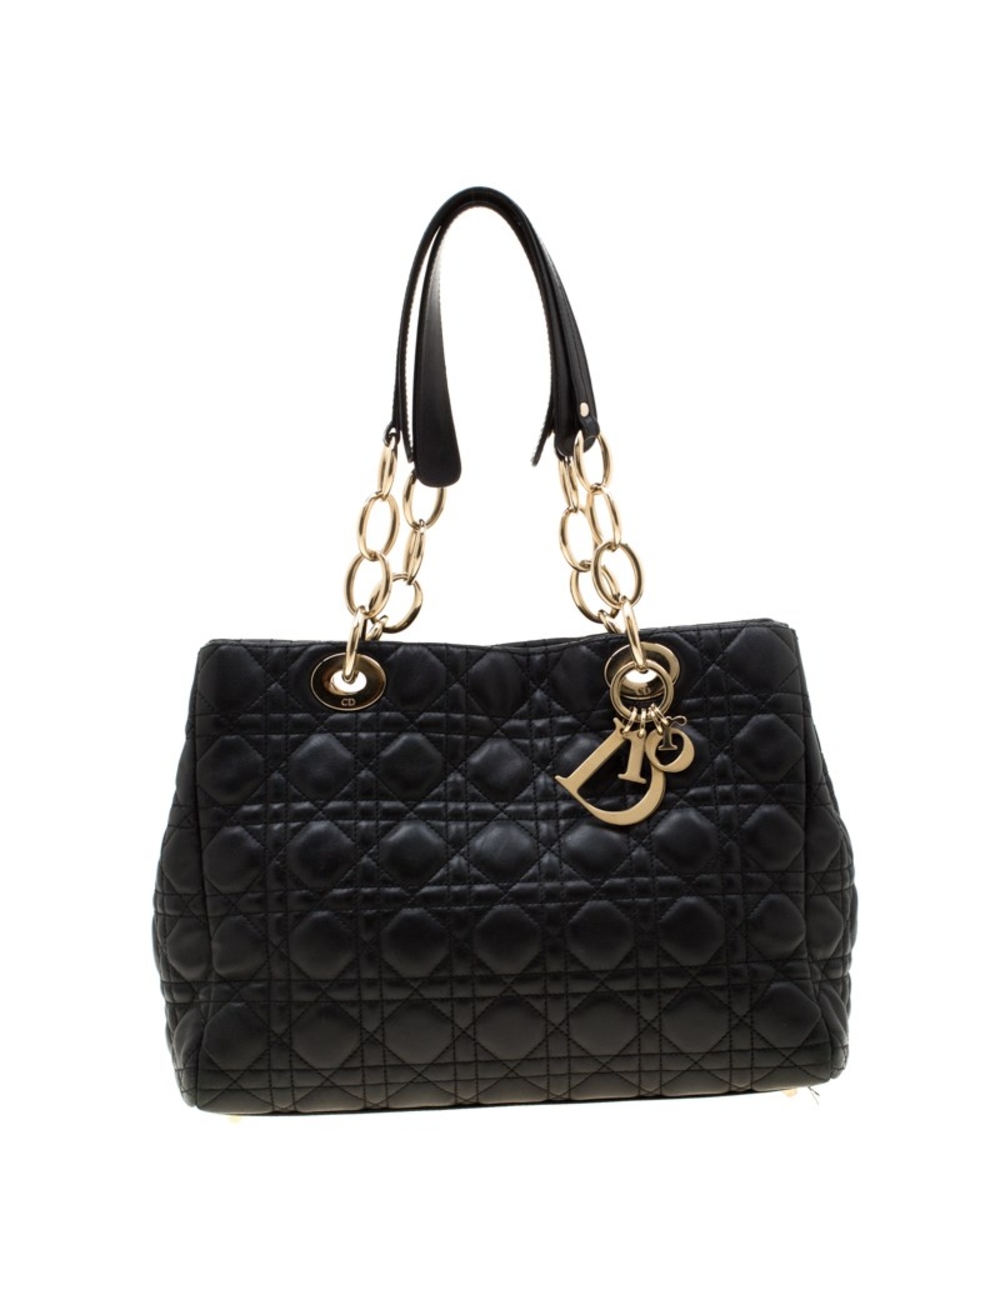 The Lady Dior tote is a Dior creation that has gained recognition worldwide and is today a coveted b